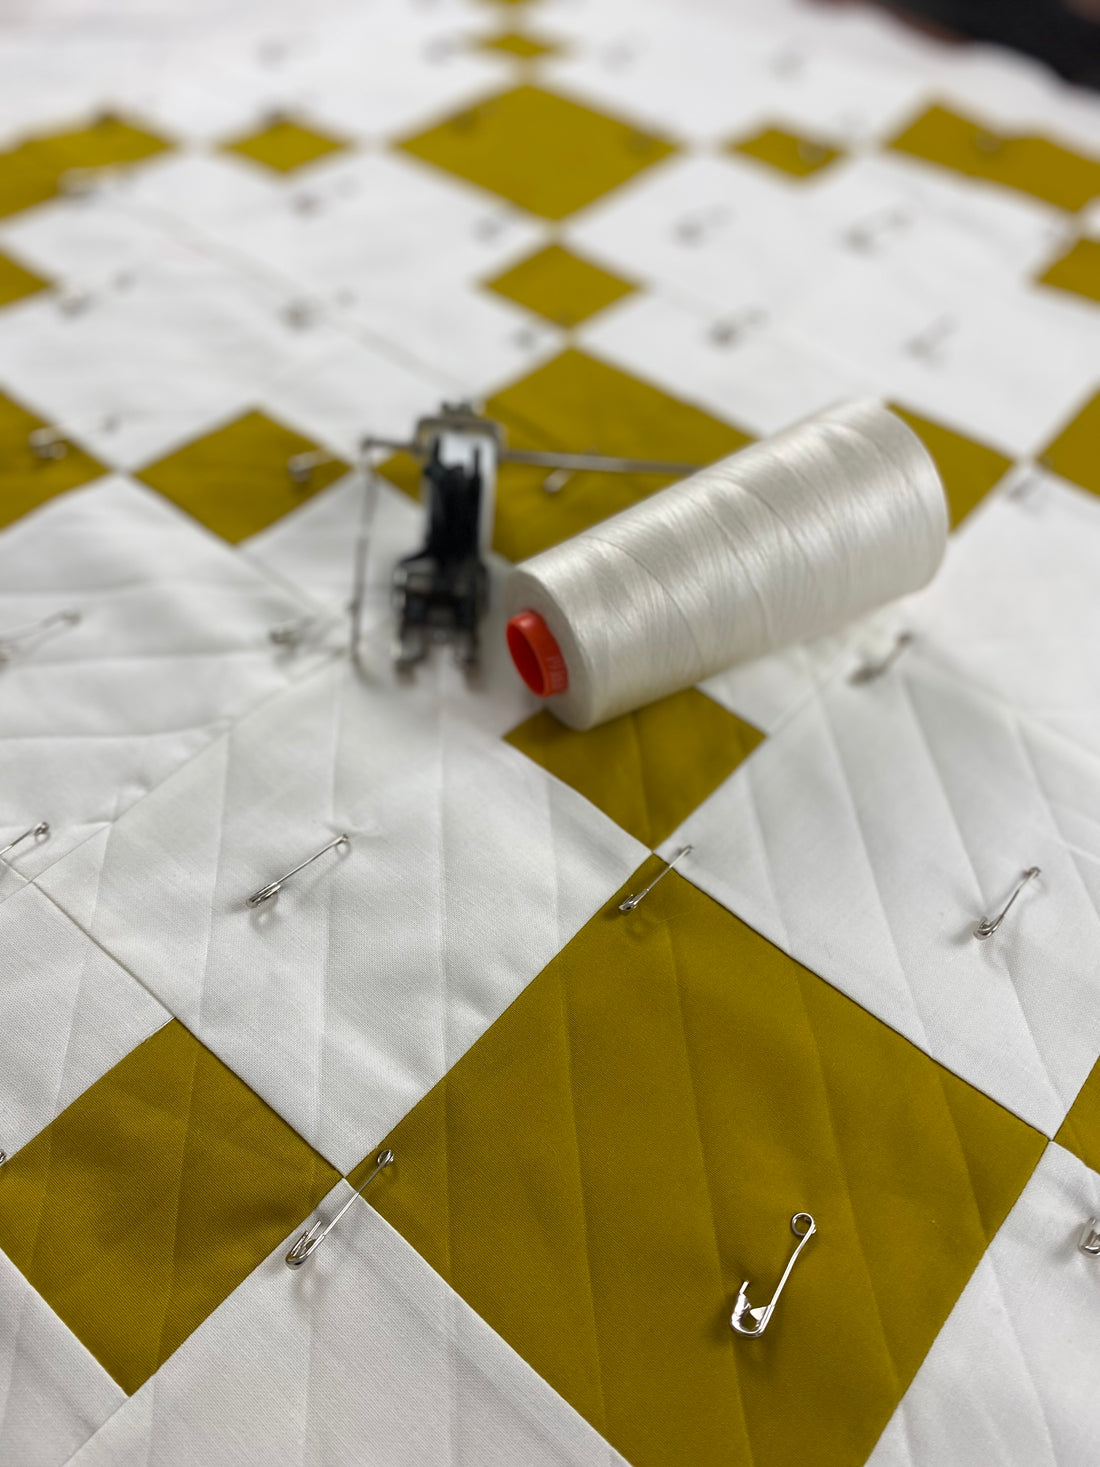 All About Pin Basting a Quilt - New Quilters